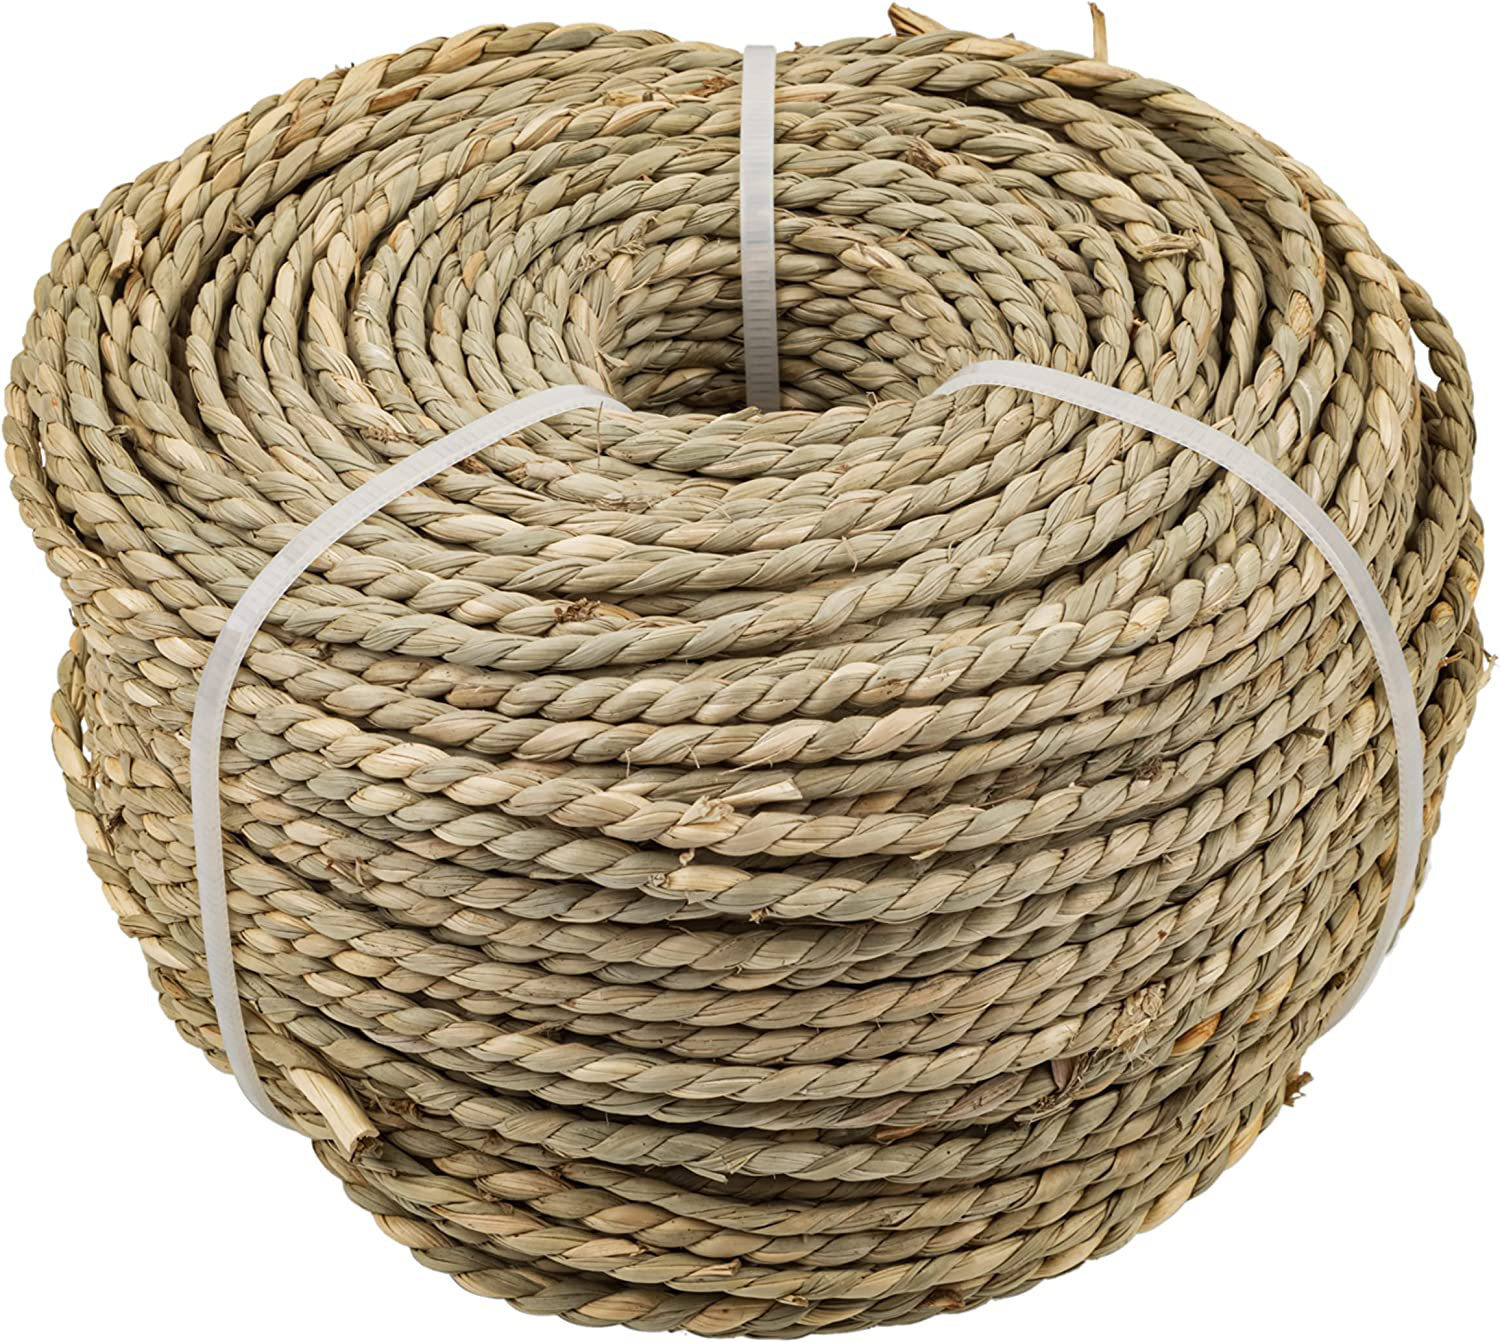 UNIQANTIQ HARDWARE SUPPLY Twisted Seagrass Rope, 1 Pound Coil, Rattan  Reed for Basket Weaving and Wicker Furniture Making